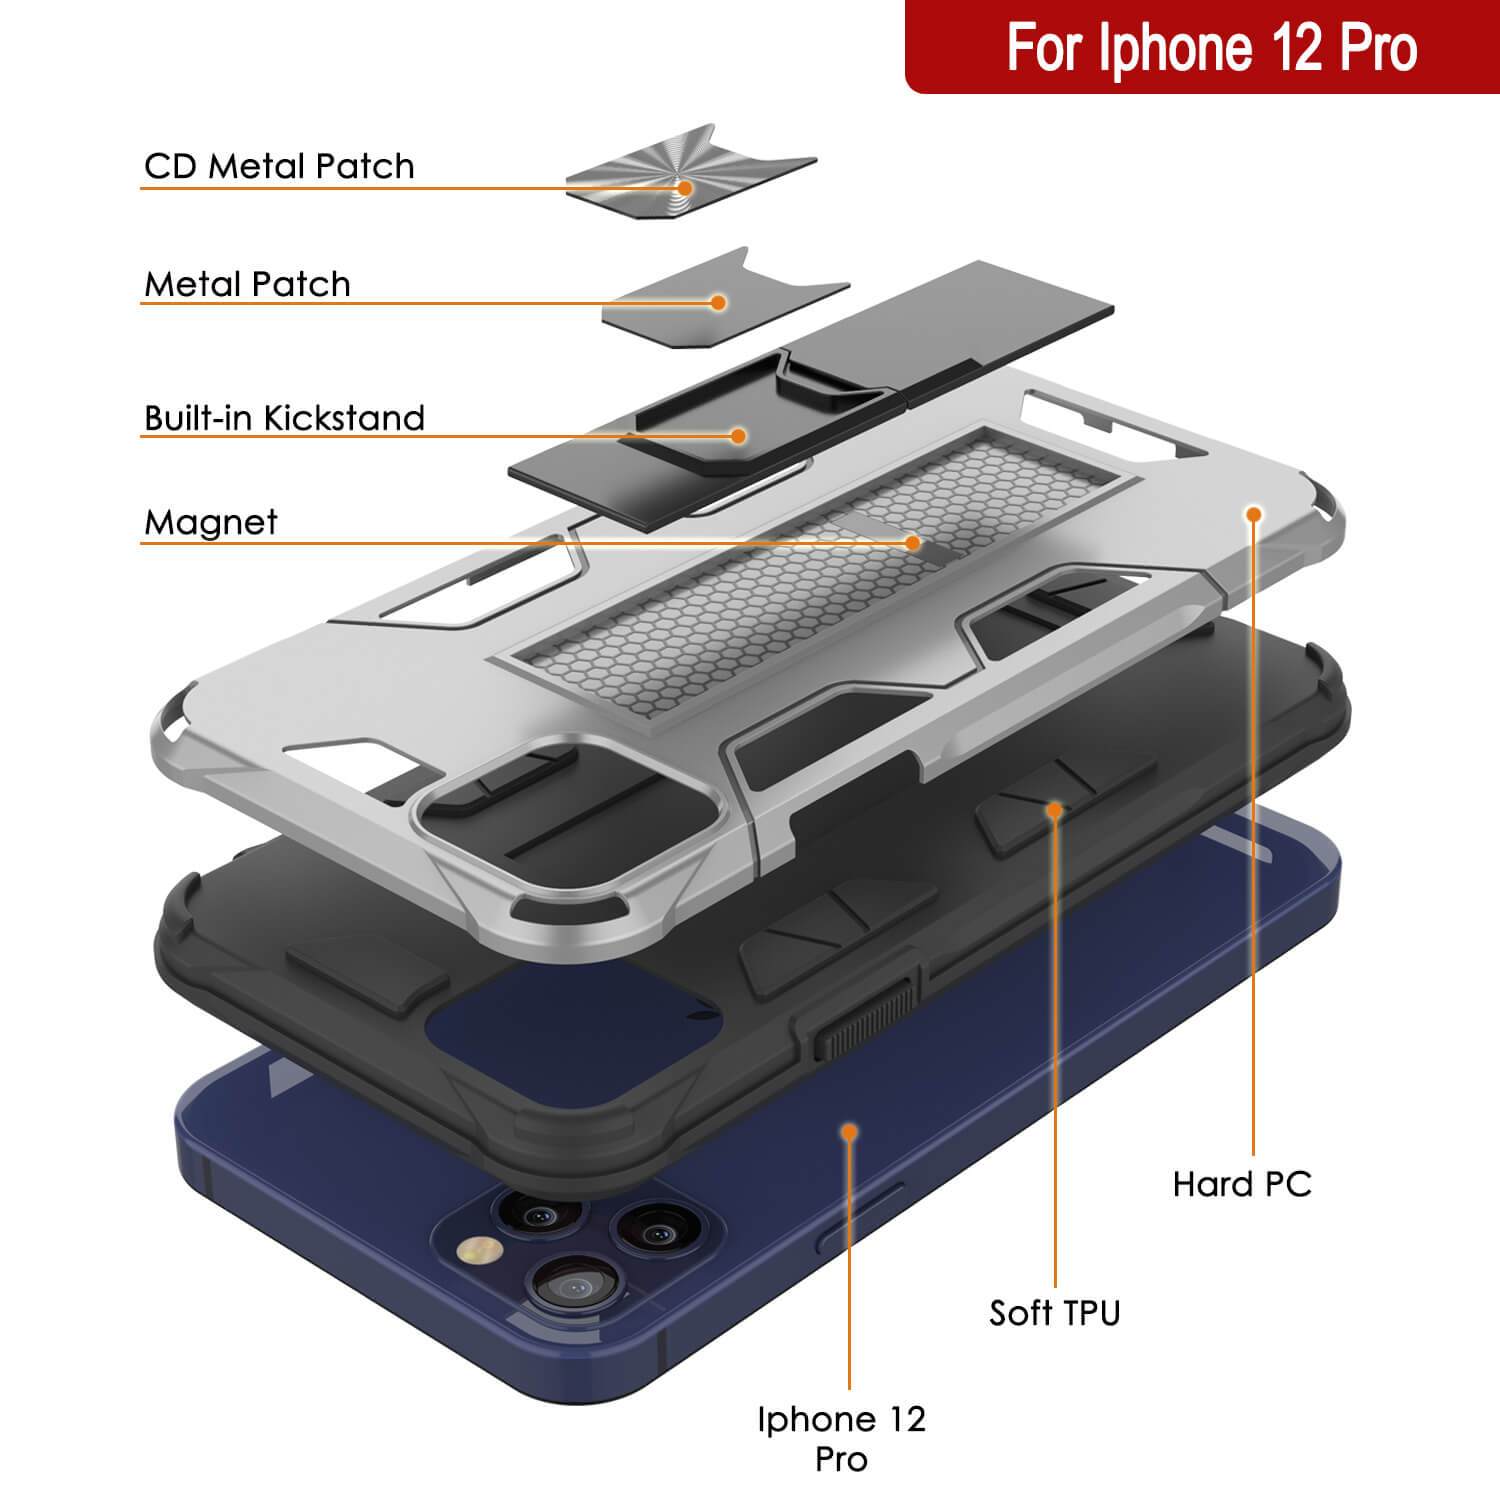 Punkcase iPhone 12 Pro Case [ArmorShield Series] Military Style Protective Dual Layer Case Silver